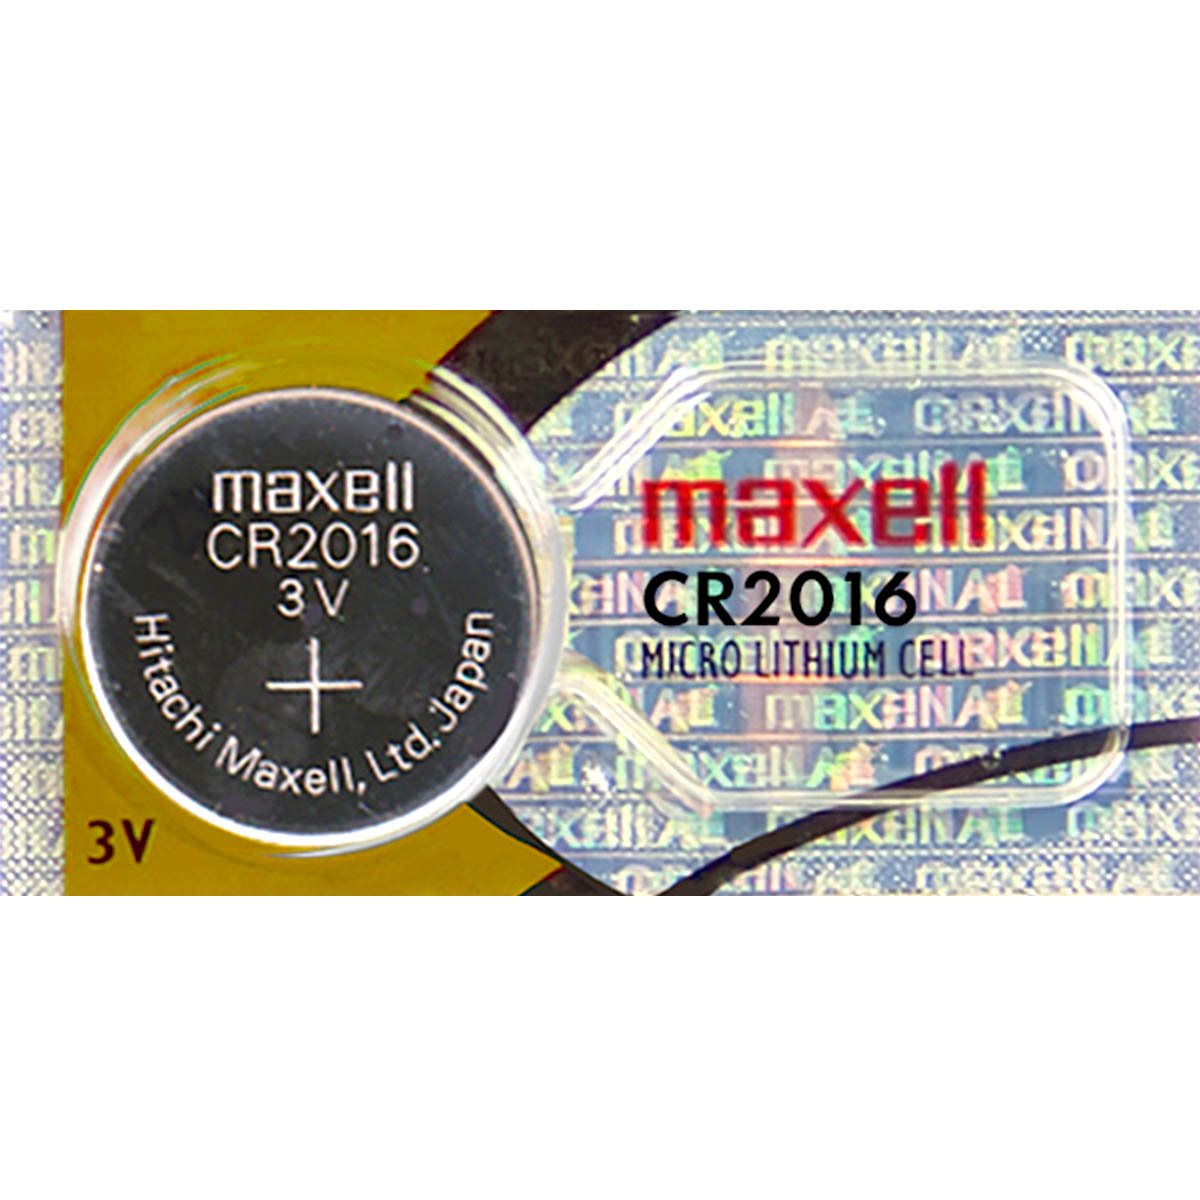 Maxell CR2016 Battery 3V Lithium Coin Cell  (1PC)